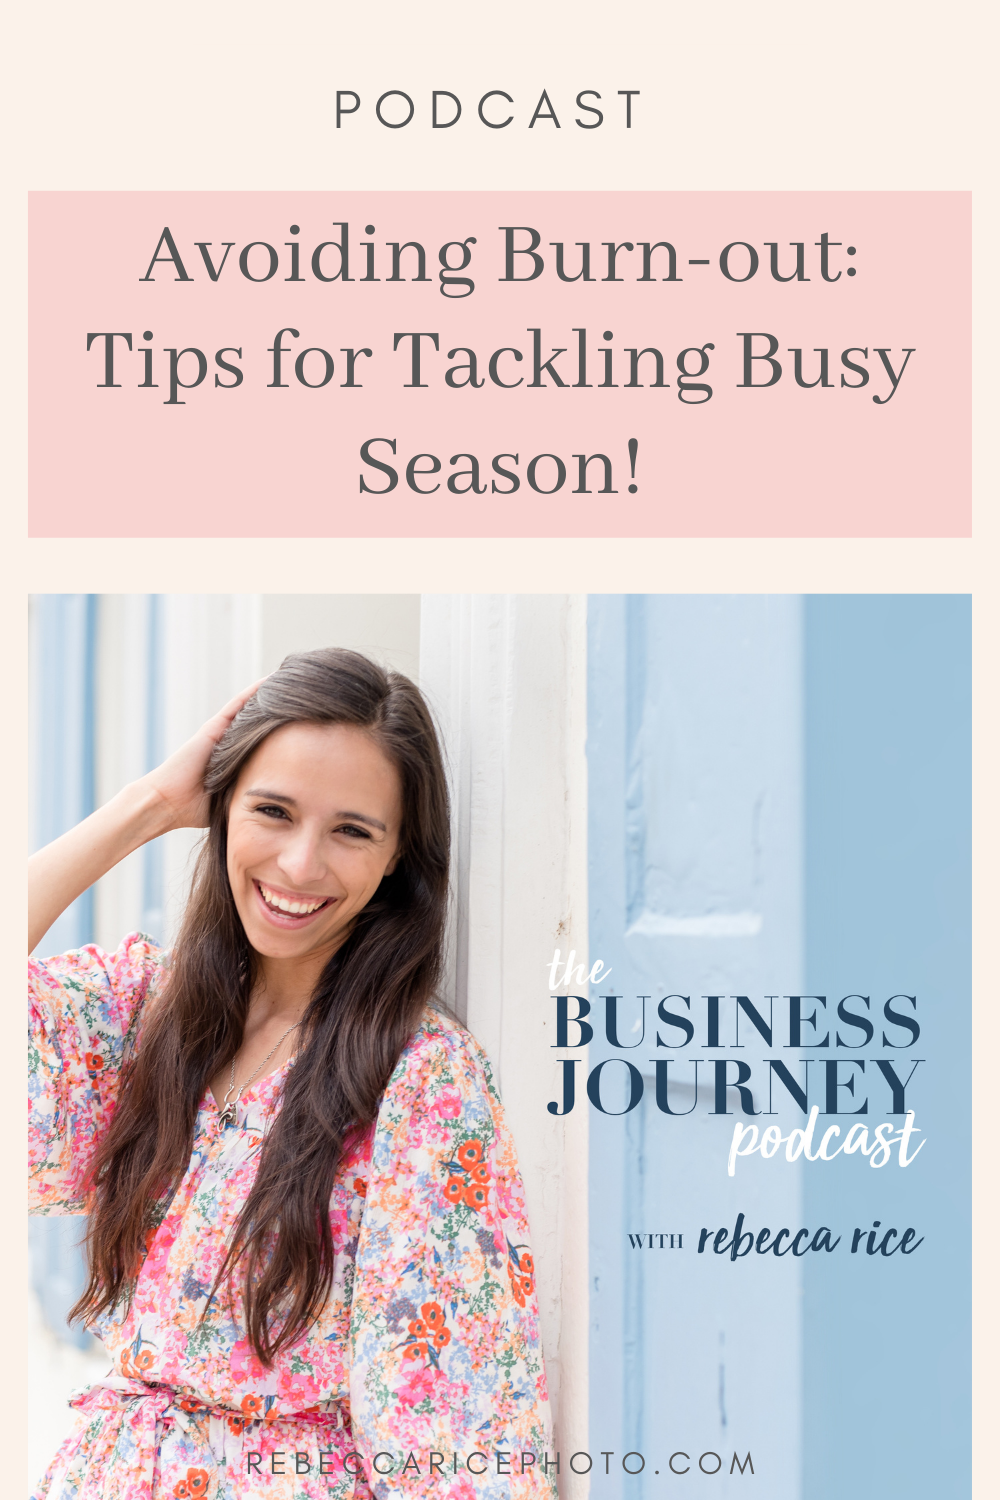 Tips to avoid burnout as a small business owner in busy season: tips from Rebecca Rice on the Business Journey Podcast